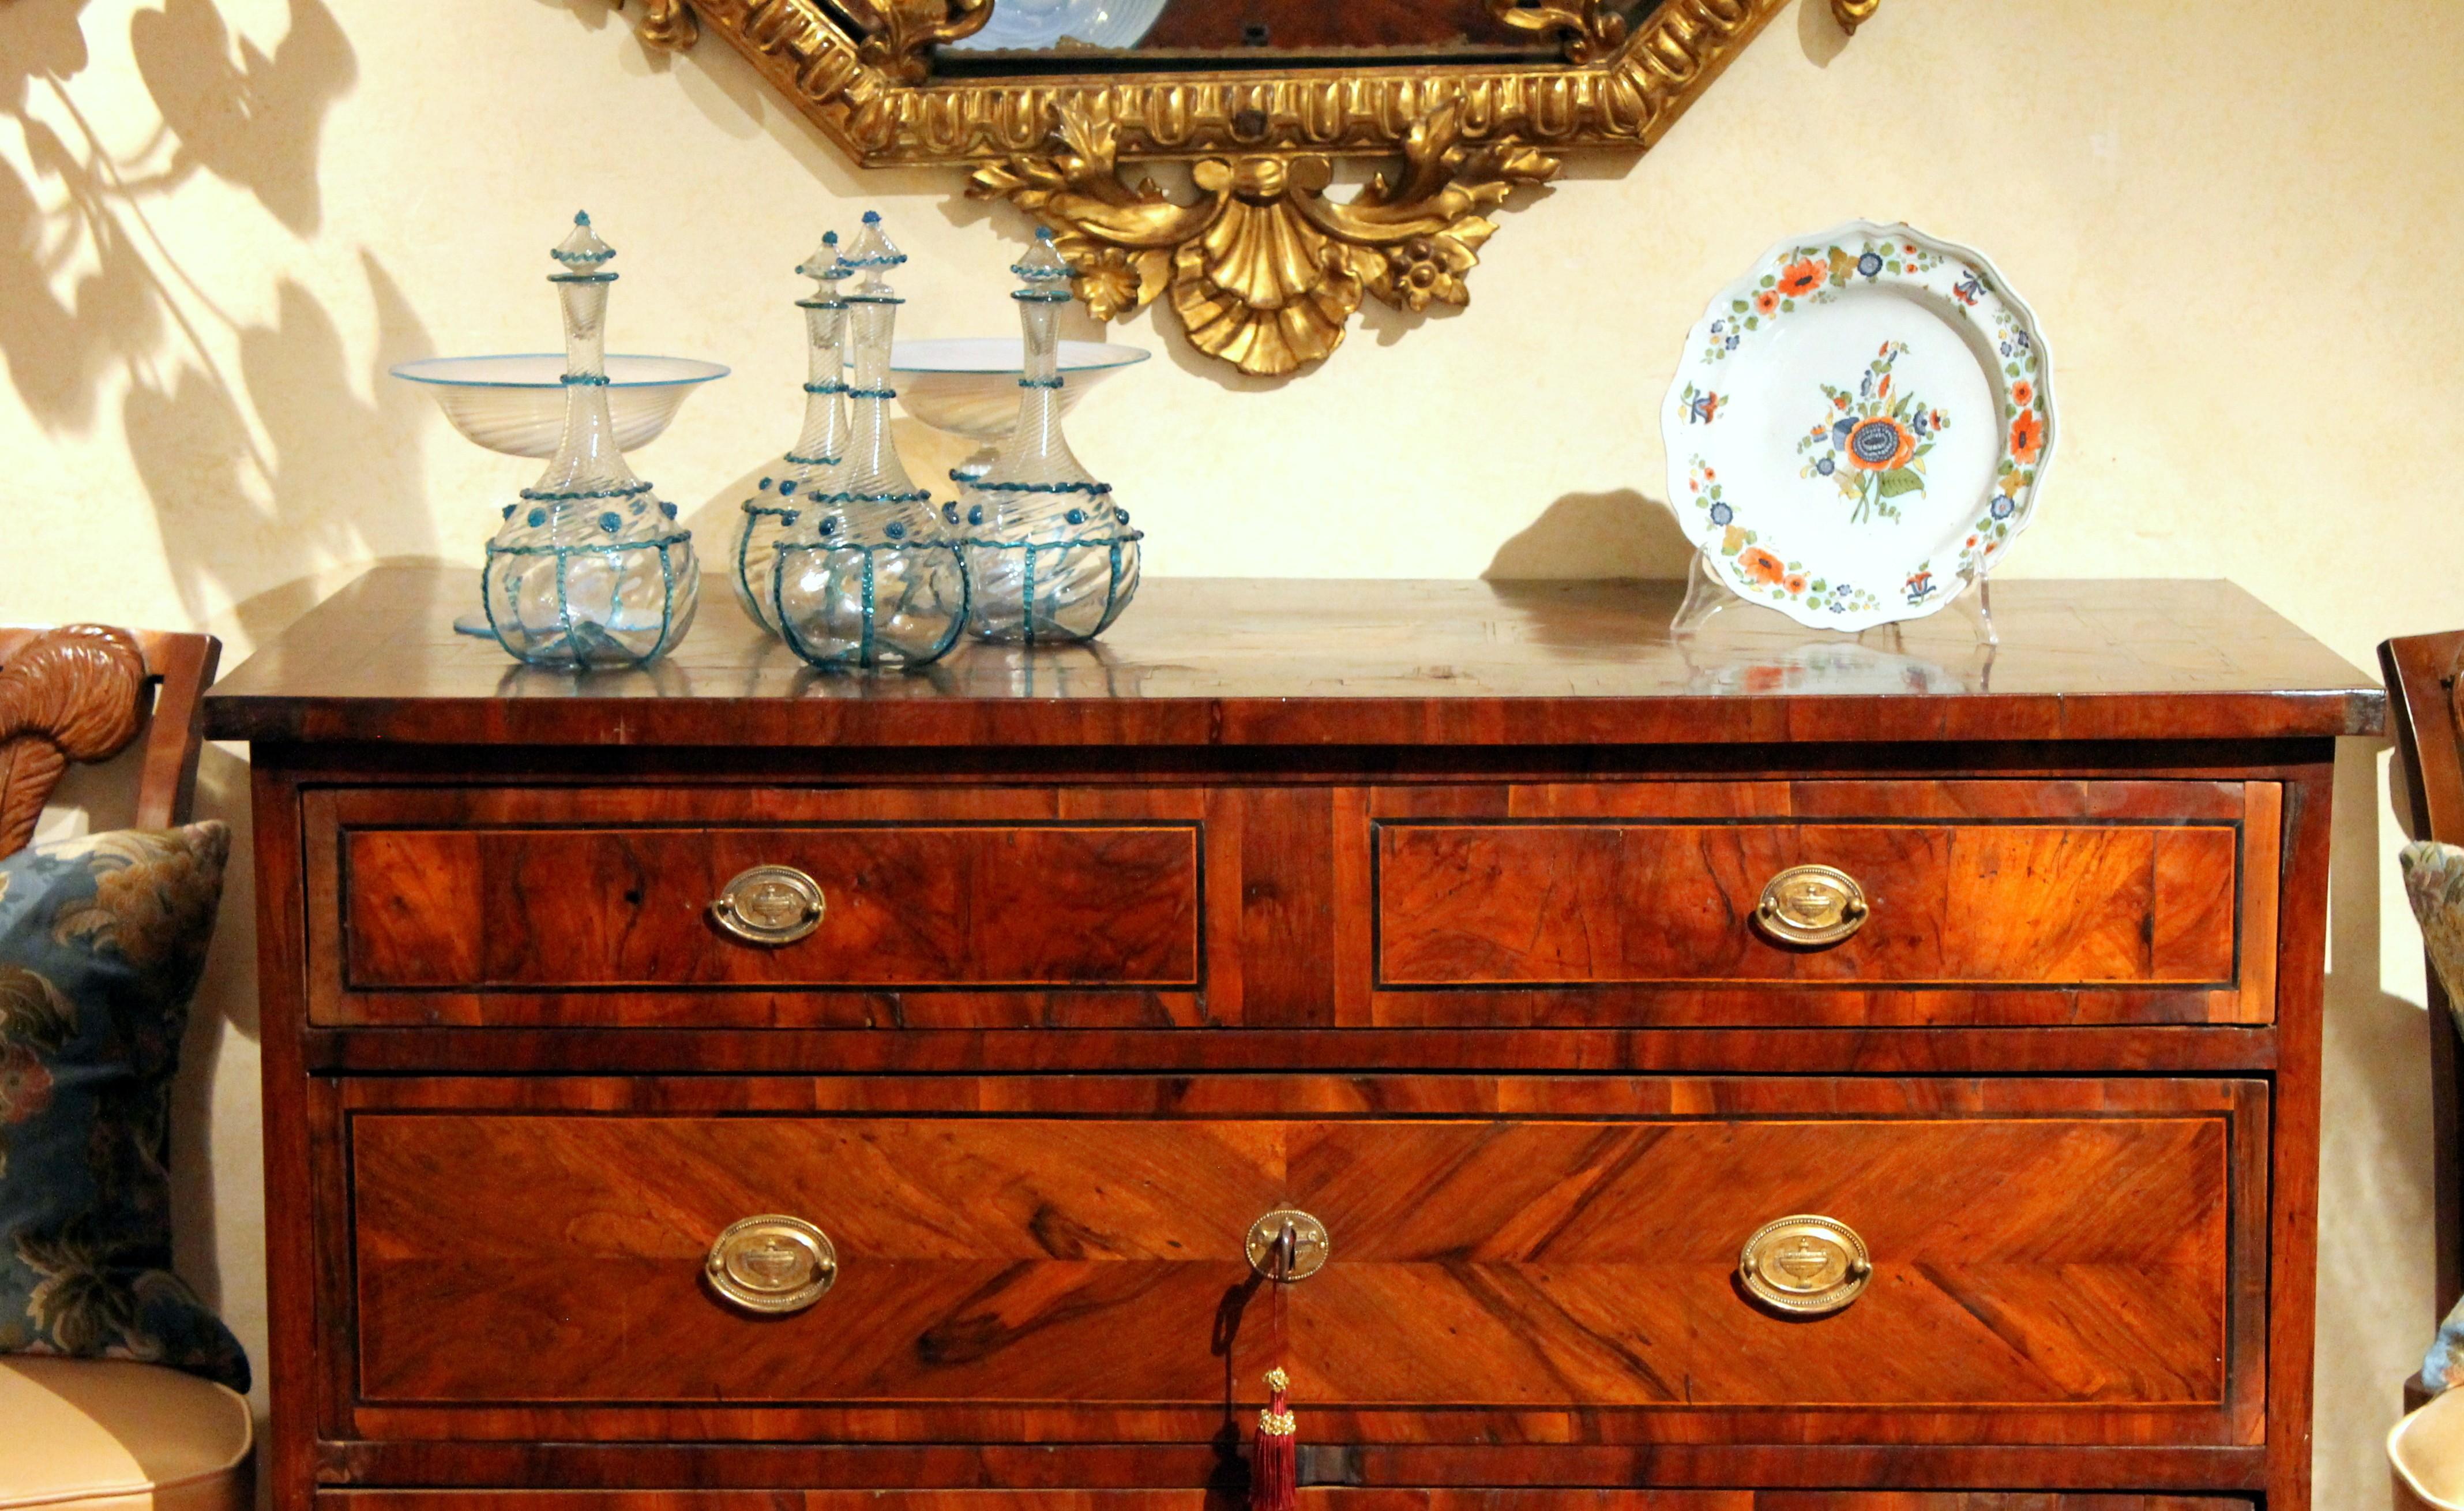 This Italian Louis XVI period walnut three-drawers commode from the late 18th century, with bronze handles, banded drawers and fluted tapered square legs stands out for its marquetry, a wonderful hand crafted inlay work that adorn both the top and